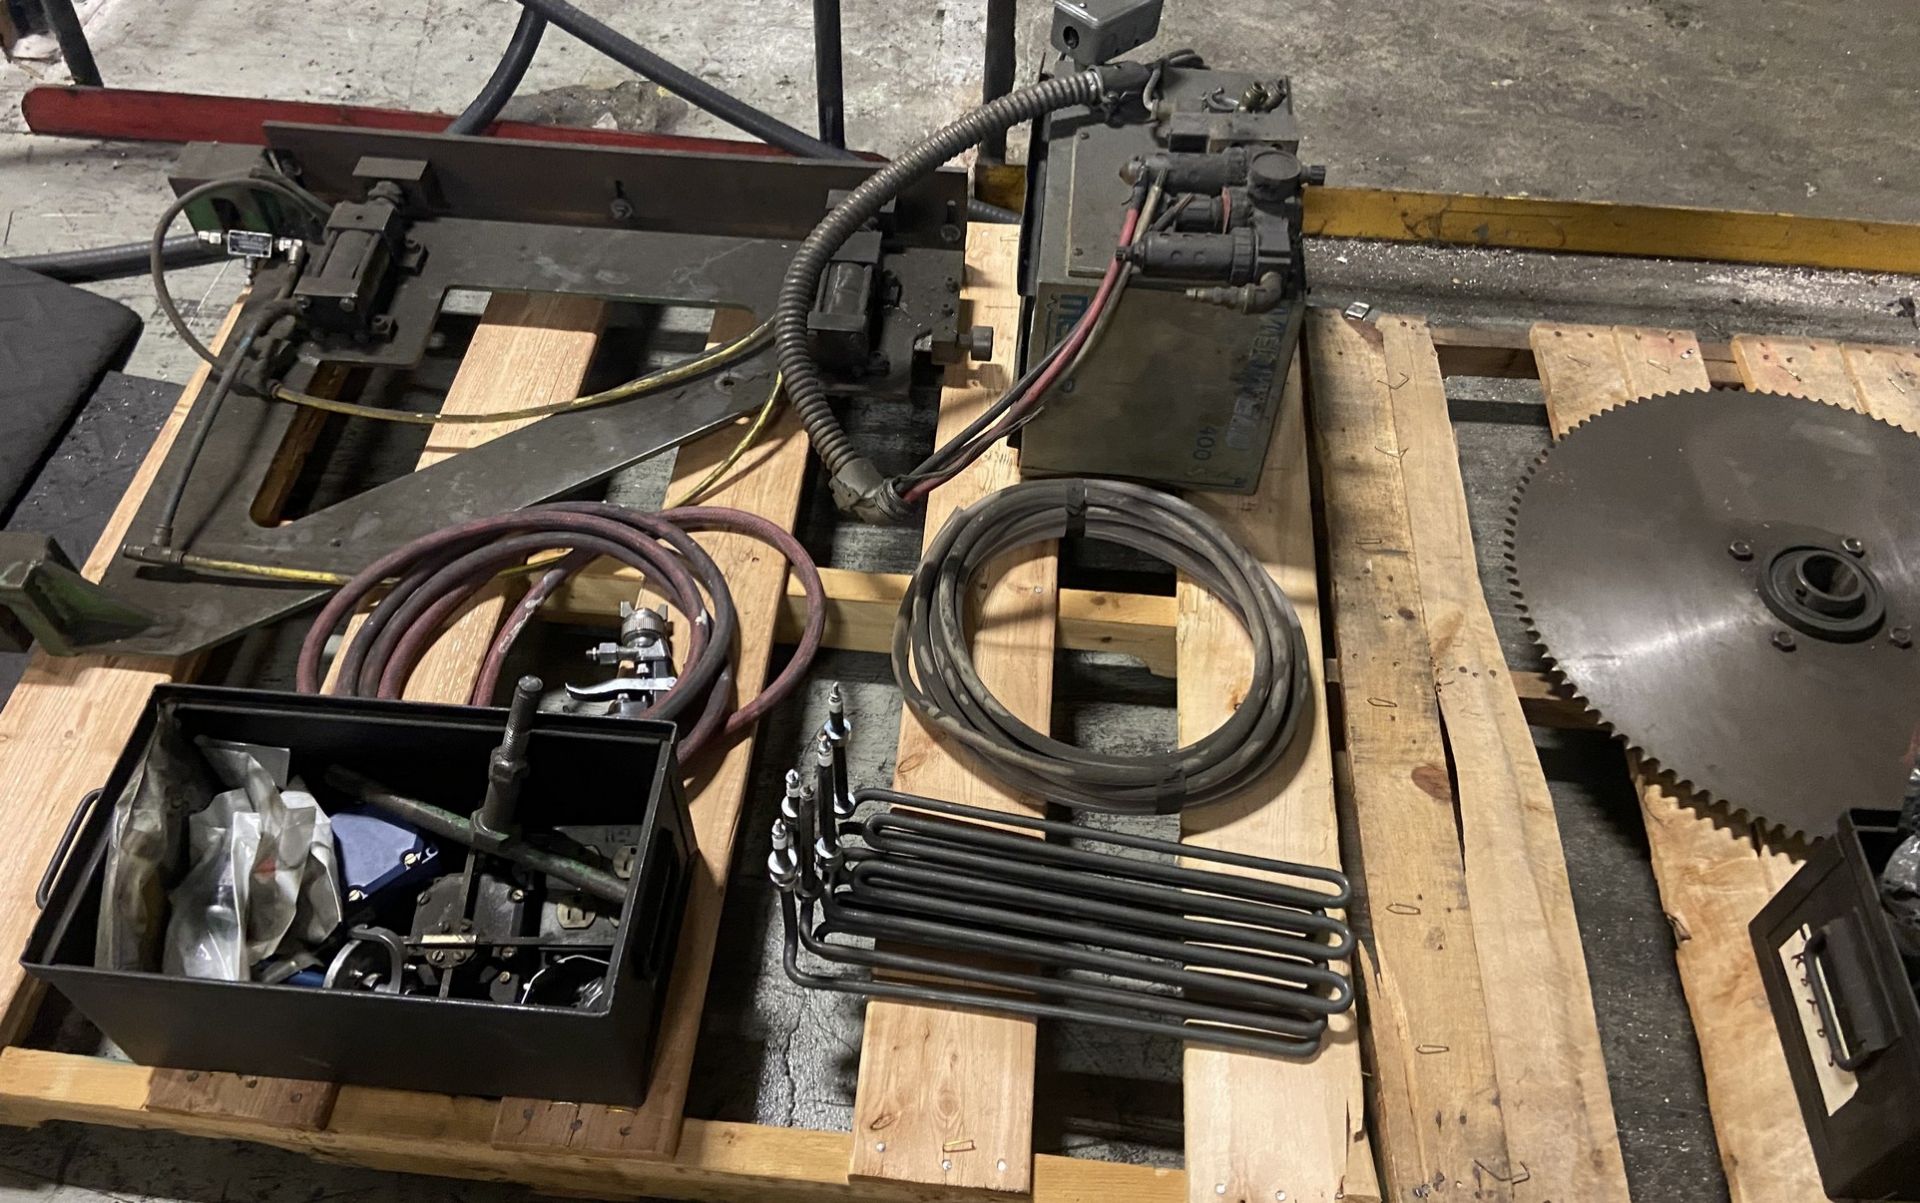 LOT (7) PALLETS OF ASSORTED TOOLING, ELECTRIC MOTORS, WELDING WIRE, FILTERS, CONTROL VALVES, CHAIN - Image 8 of 9